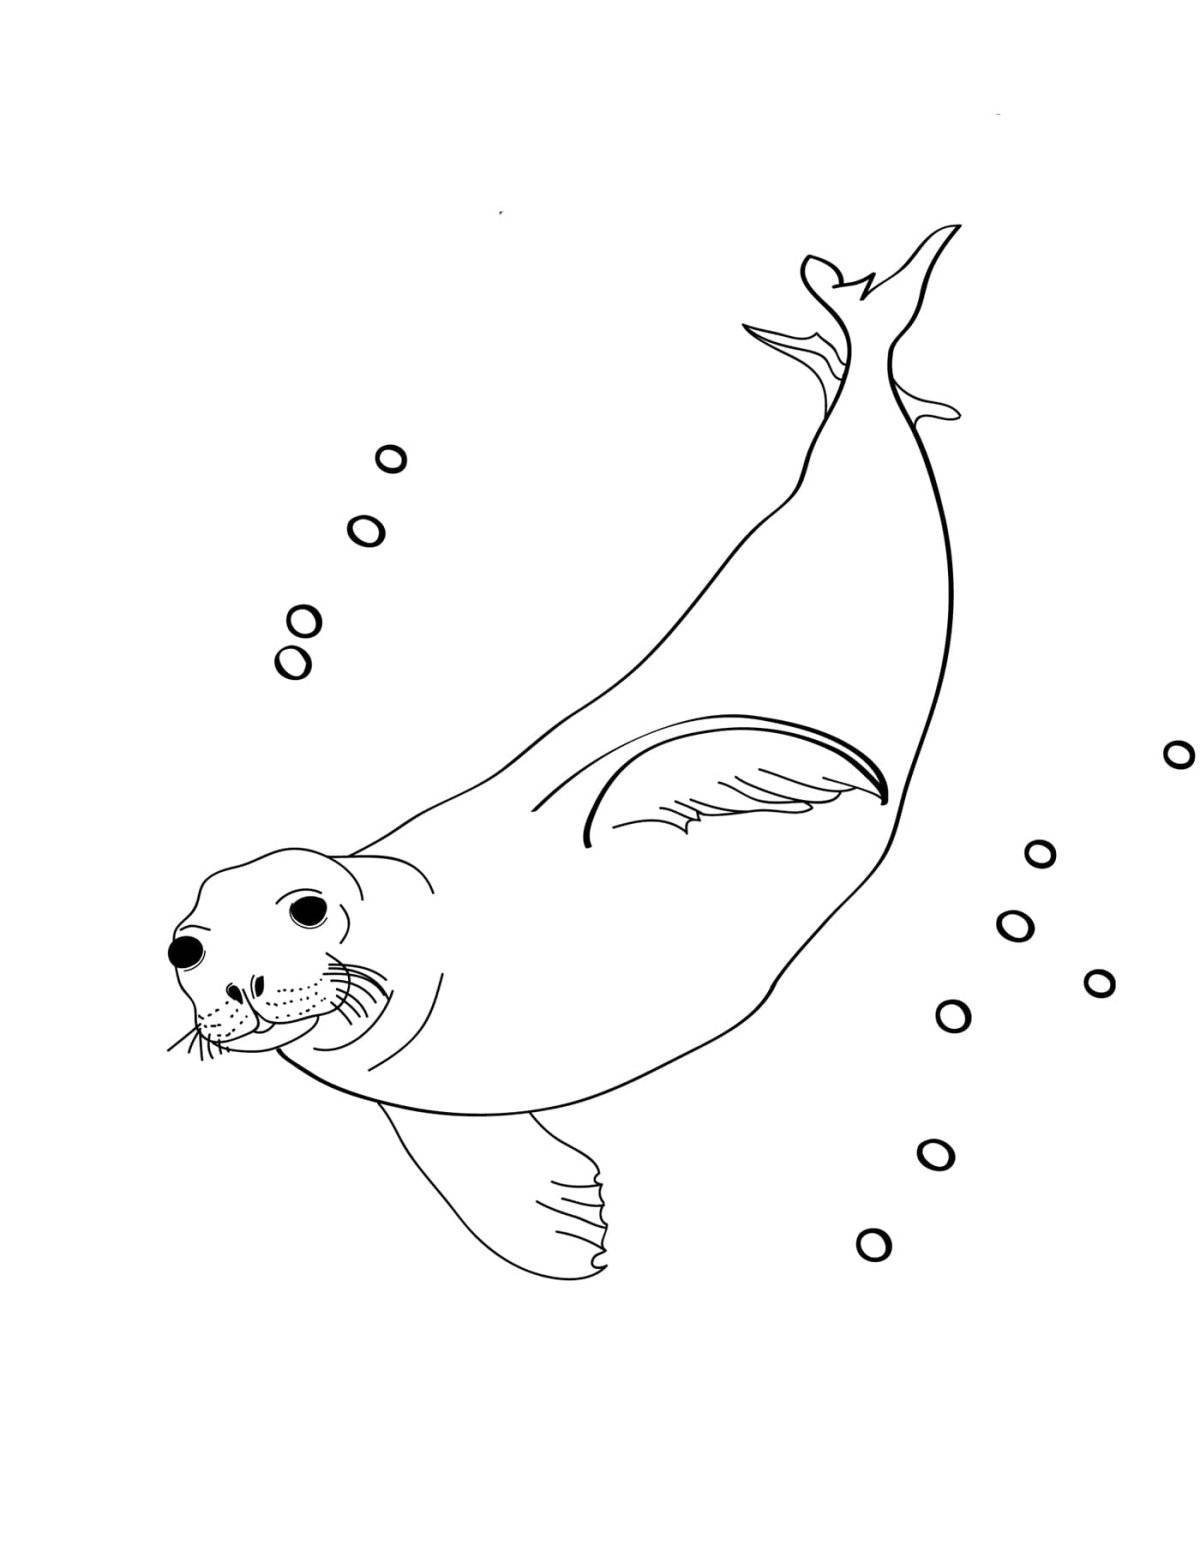 Seal for kids #8